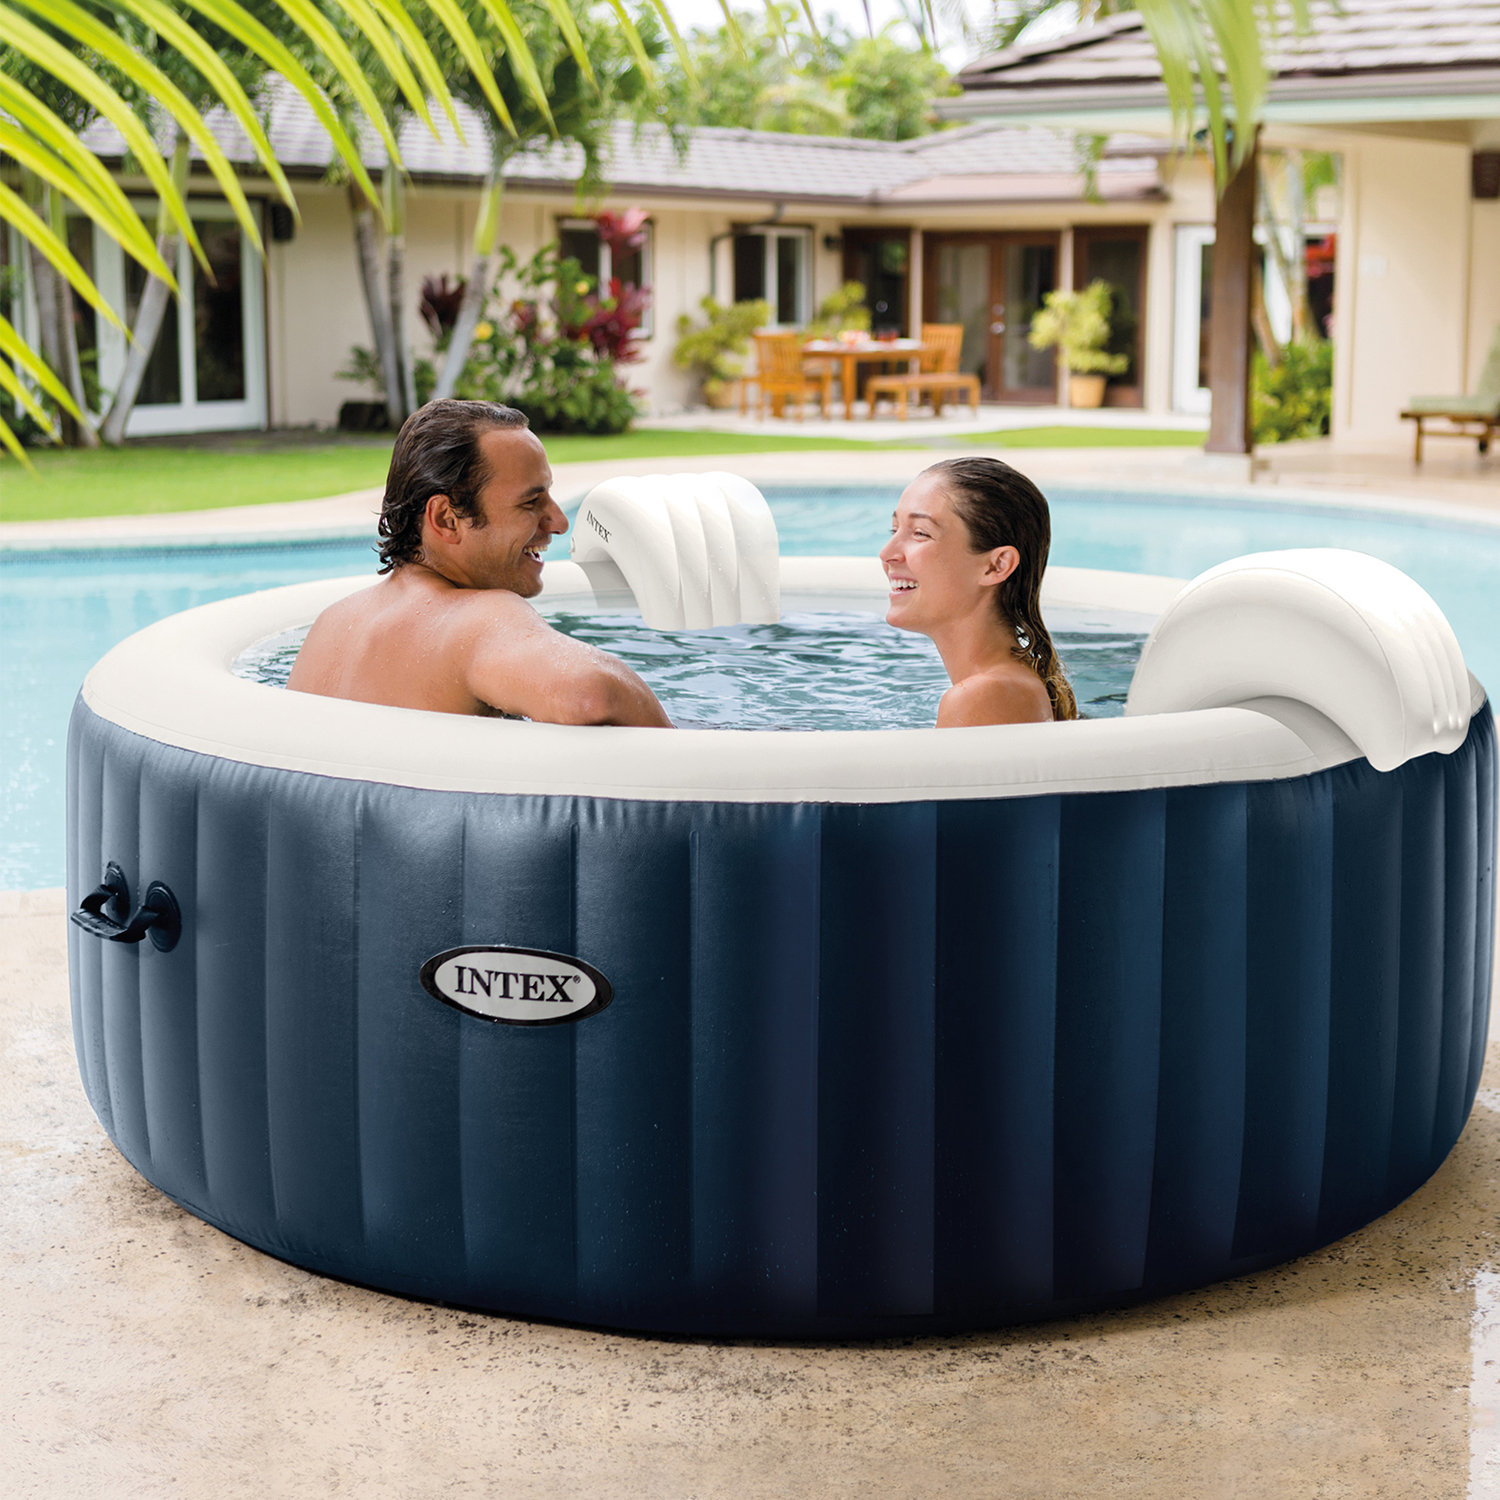 Bubble Bath Spa Mat for that incredible jacuzzi experience